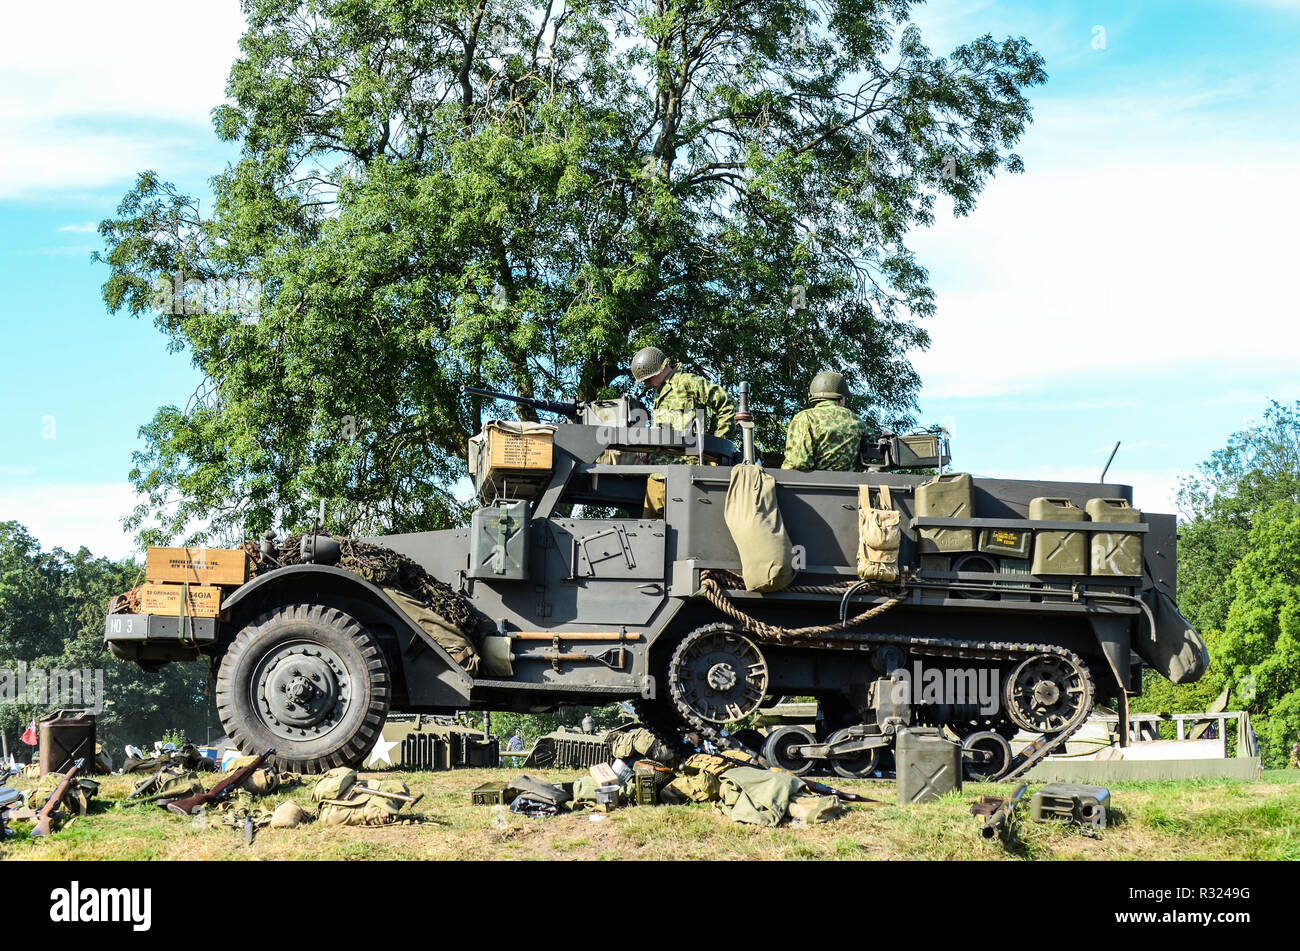 Second World War US Army re-creation with M3 Half-track, known officially as the Carrier, Personnel Half-track M3, armored personnel carrier Stock Photo